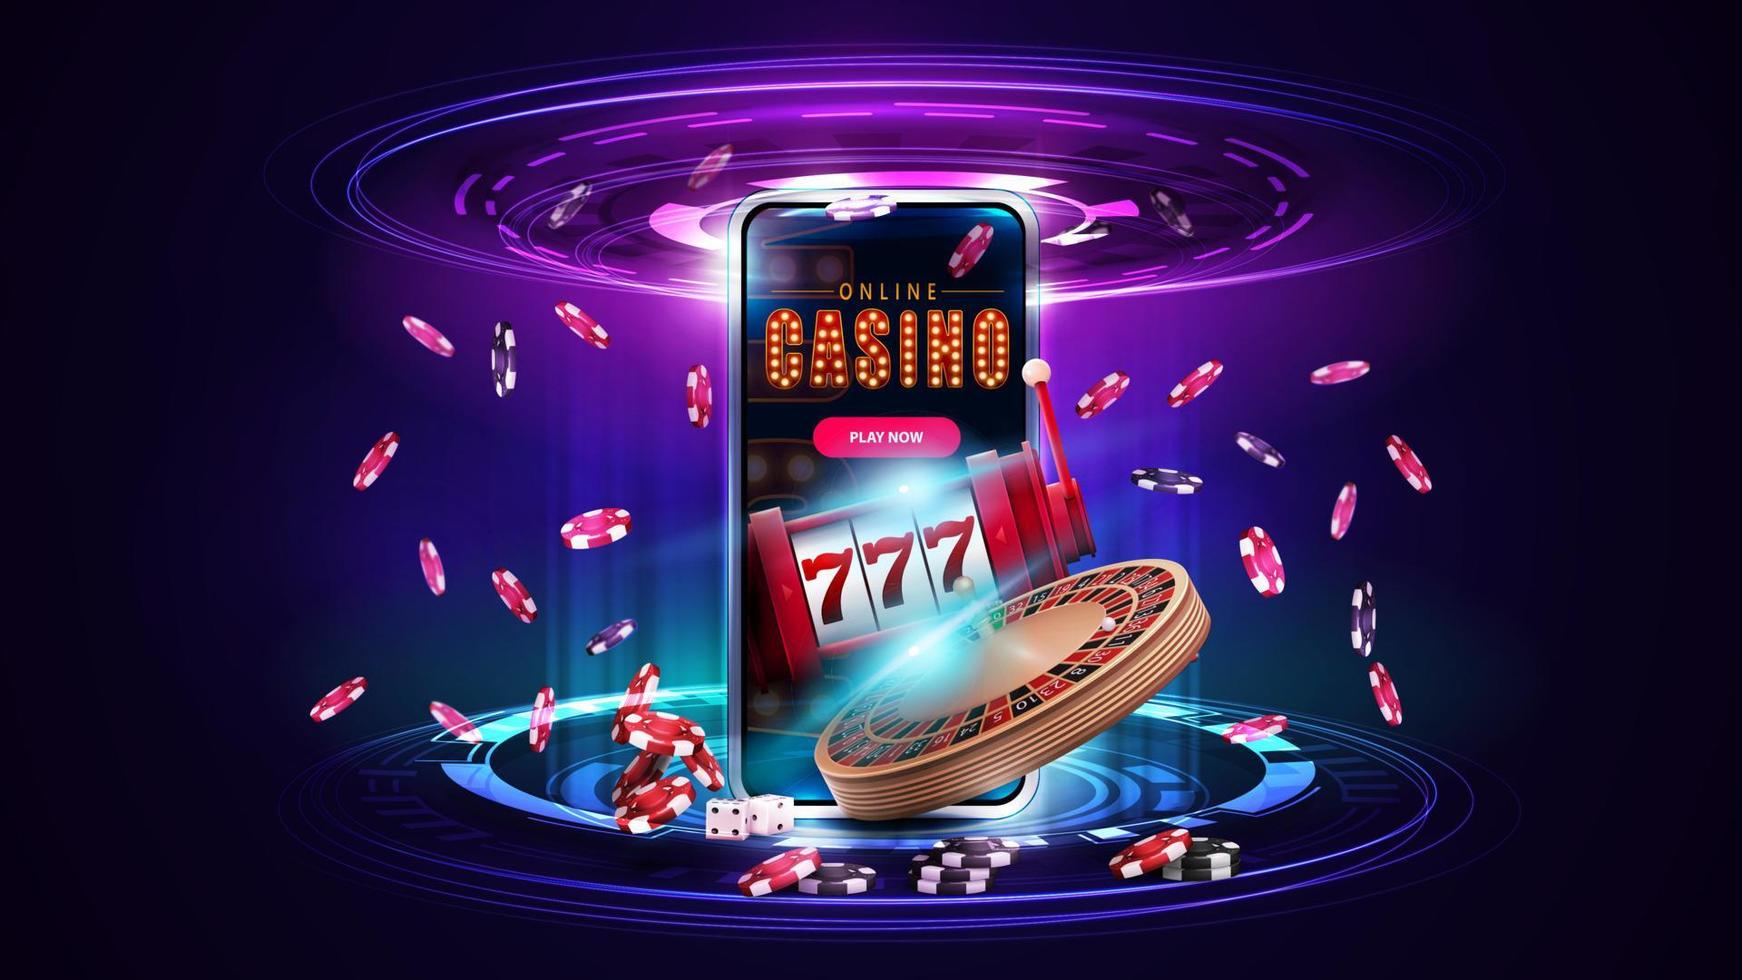 I Don't Want To Spend This Much Time On online casino top 10. How About You?